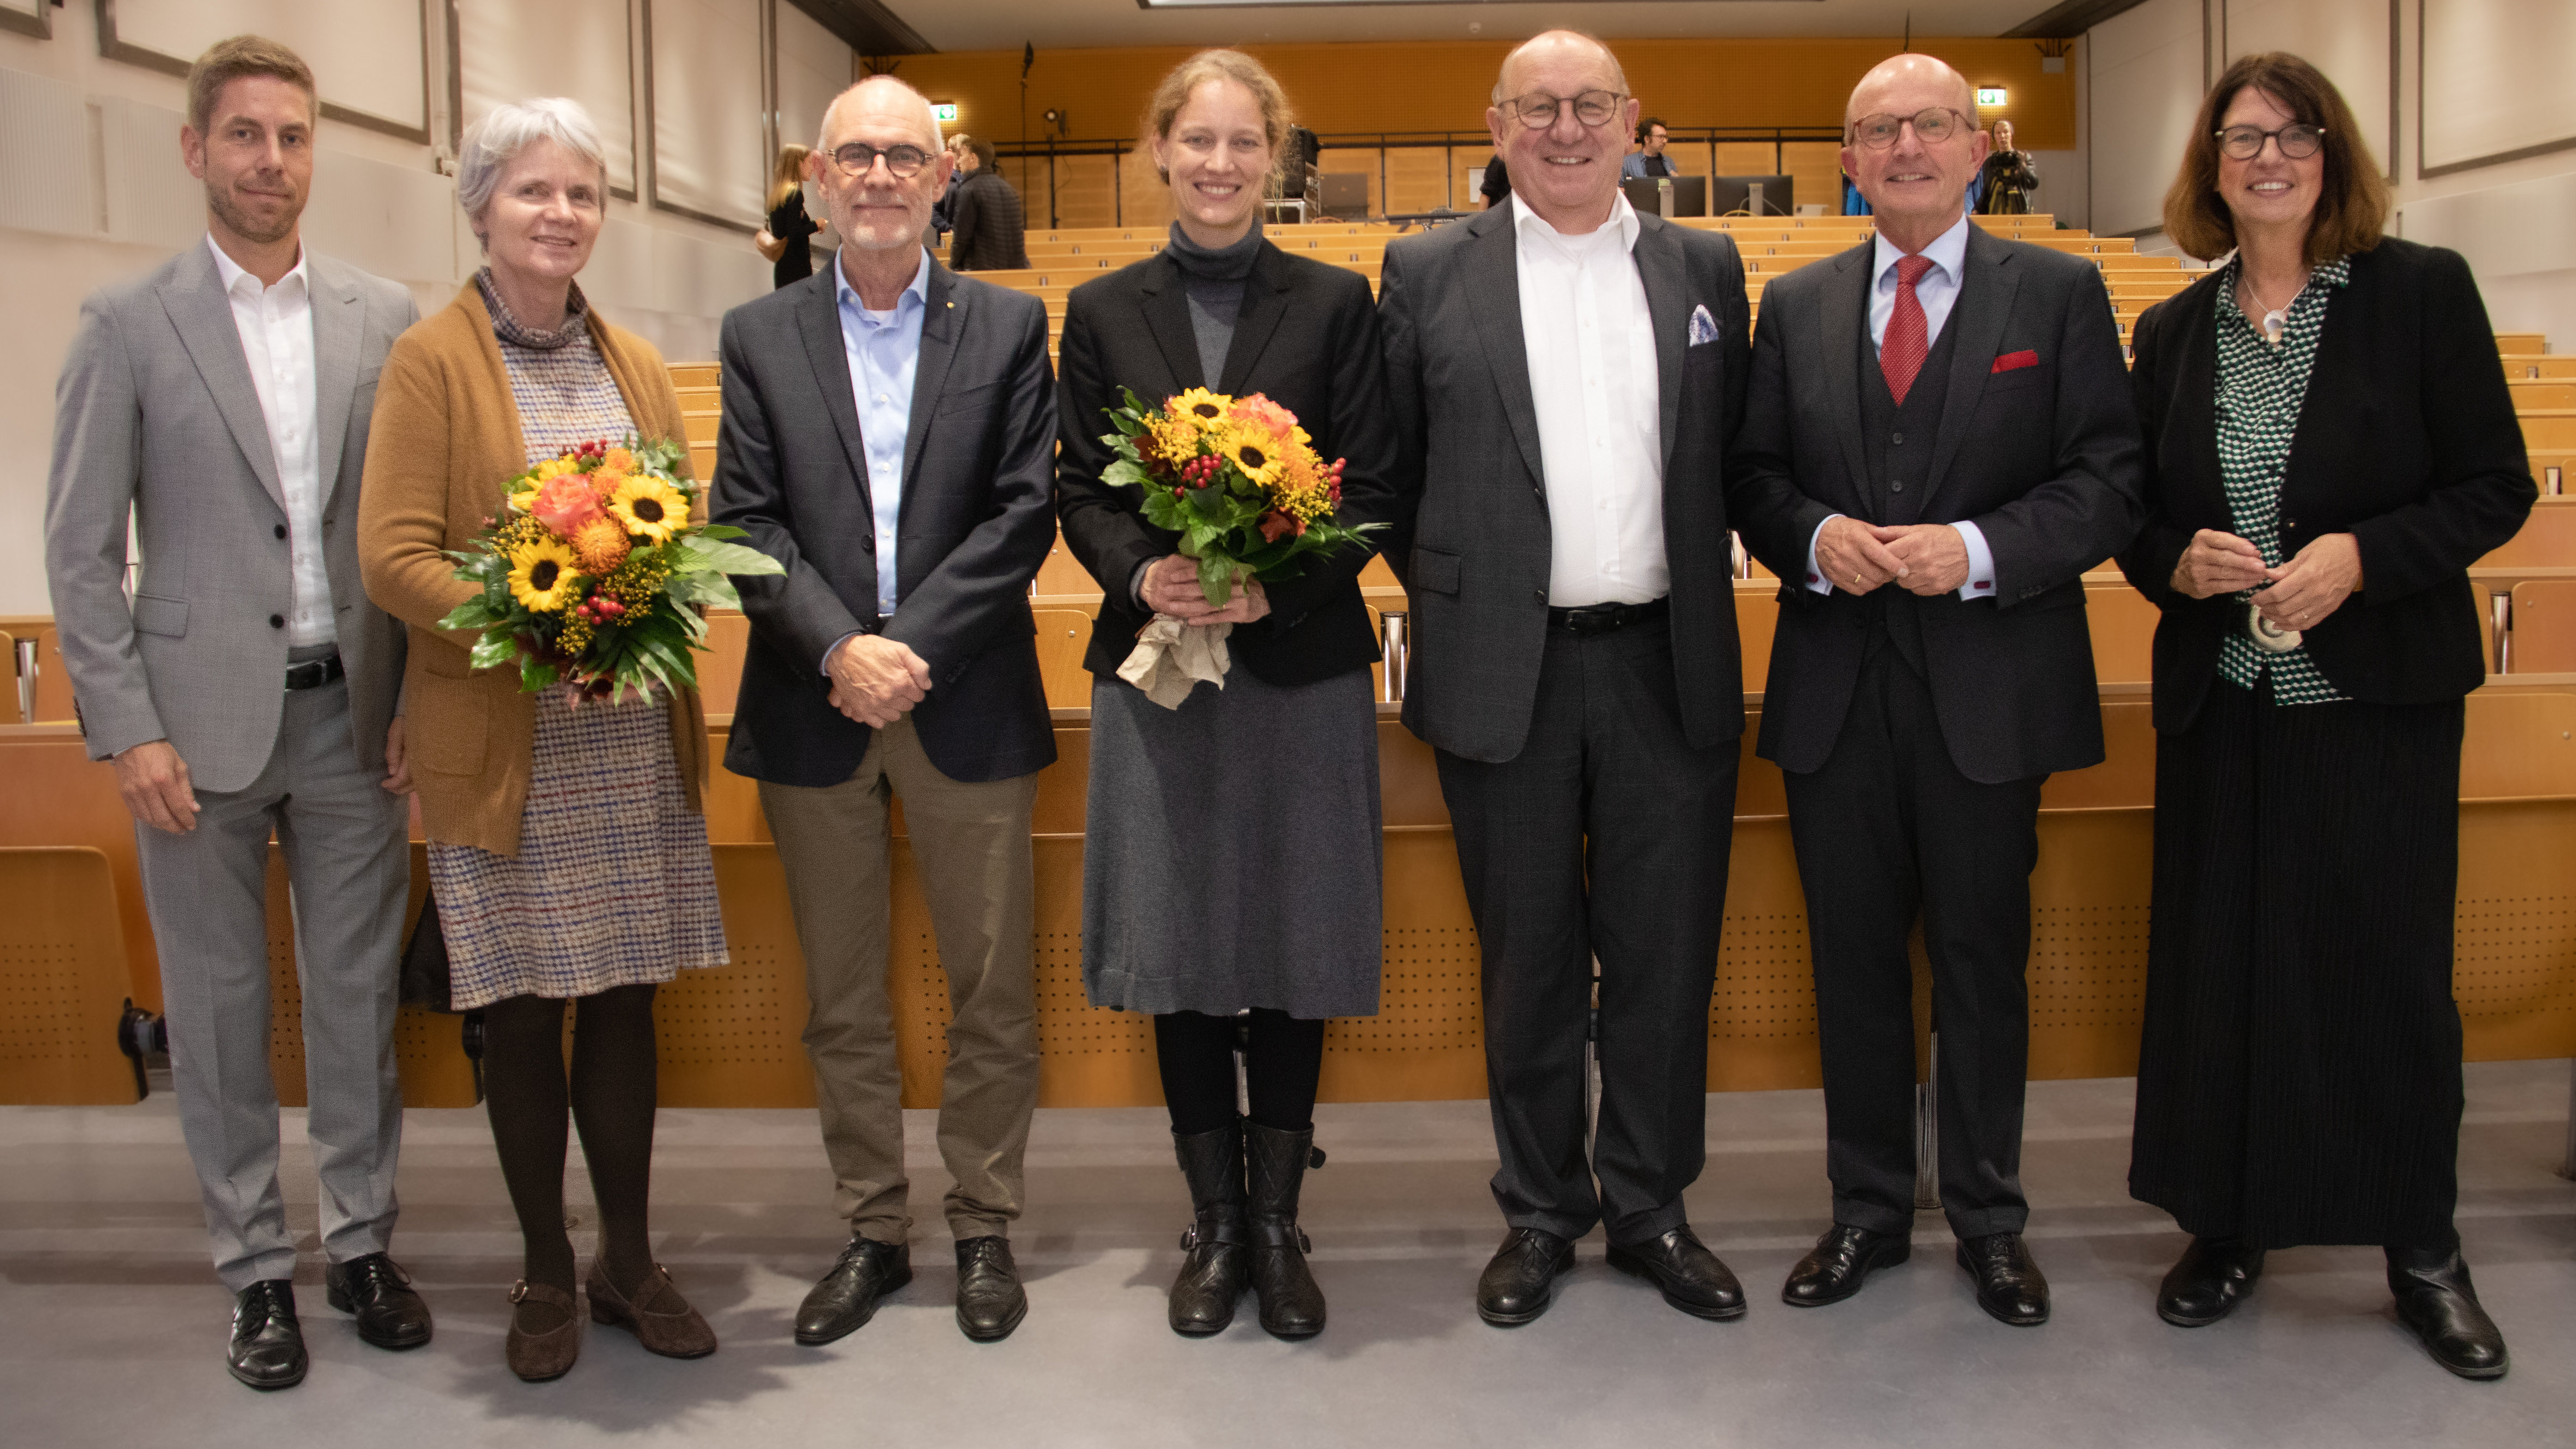 The Dies Oeconomicus, supported by the Friends‘ Association of WFI (Förderkreis).